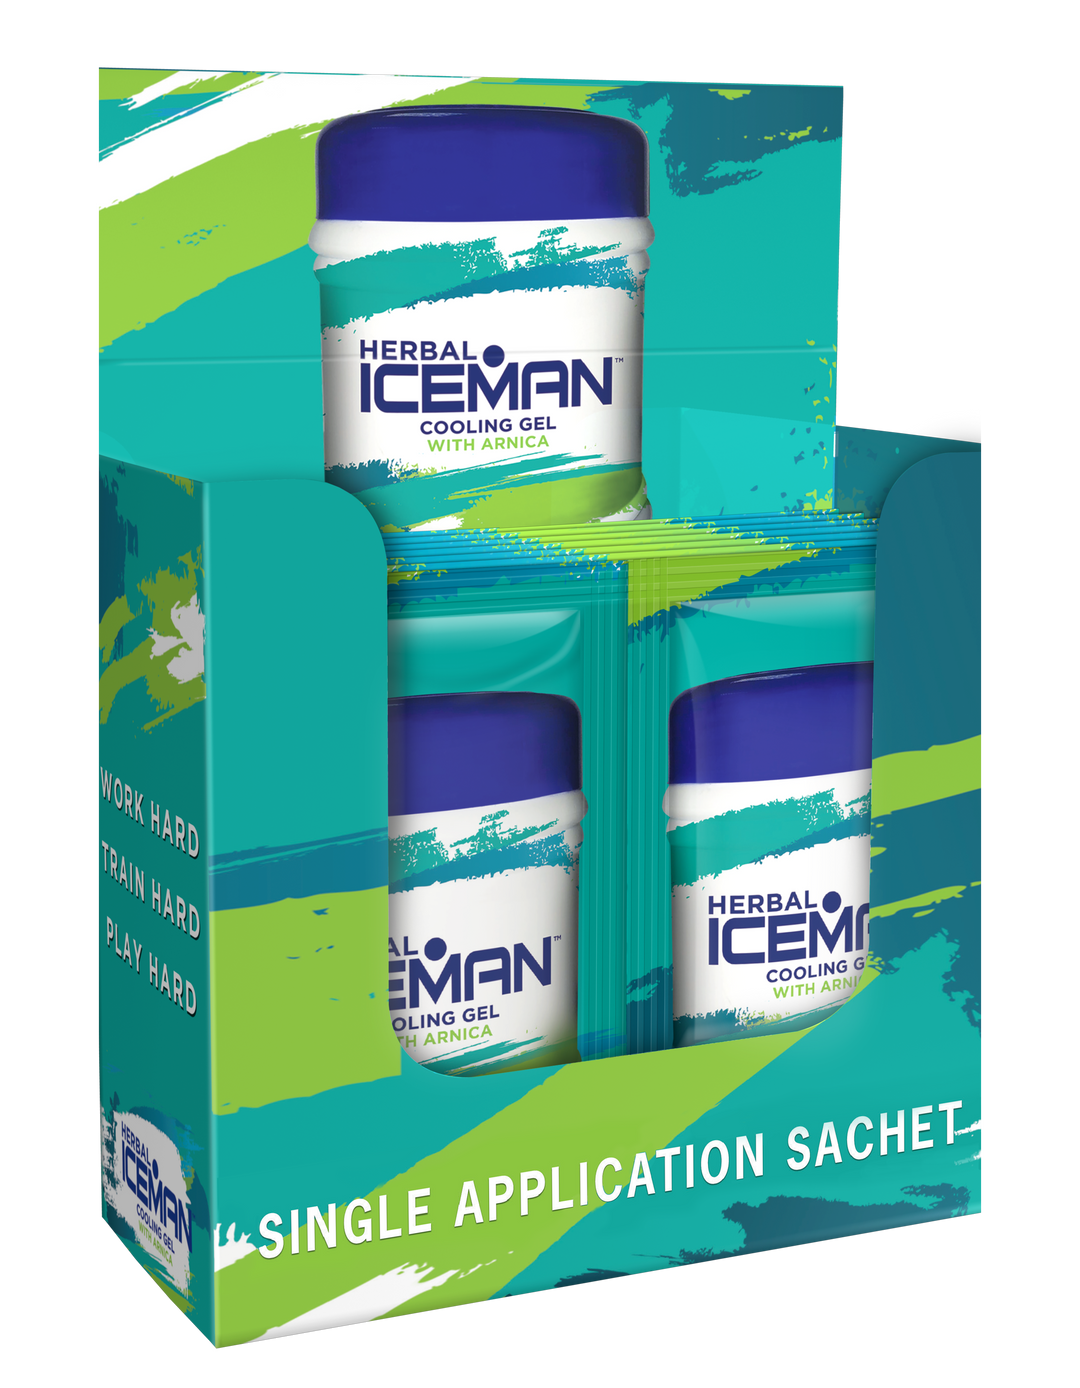 Herbal Iceman Cooling Gel with Arnica Sachets - 20's